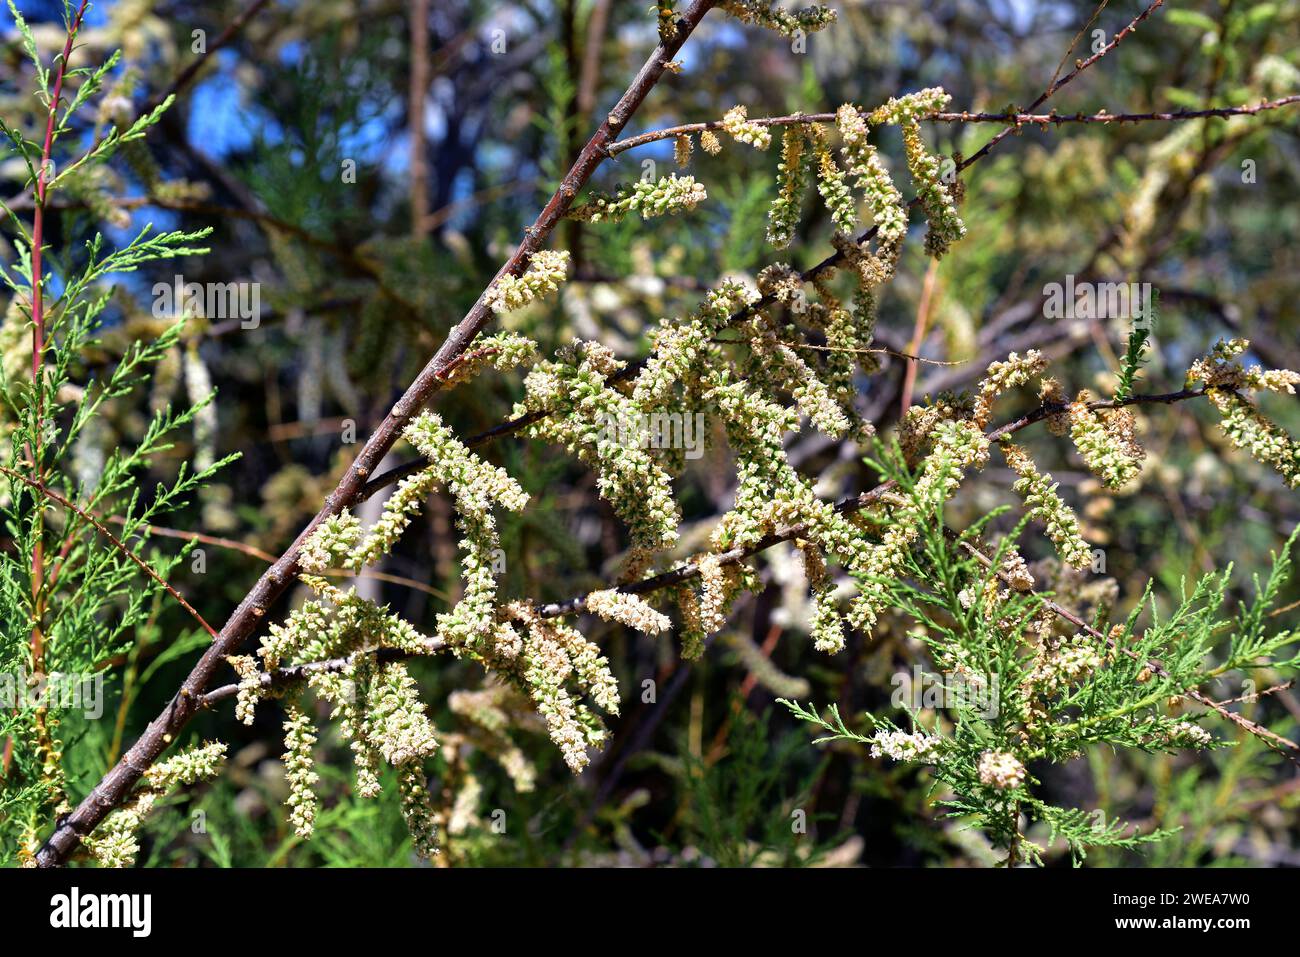 Atarfe or taray (Tamarix boveana) is a shrub or small tree native to southeastern Spain and north Africa. Flowers and fruits detail. Stock Photo